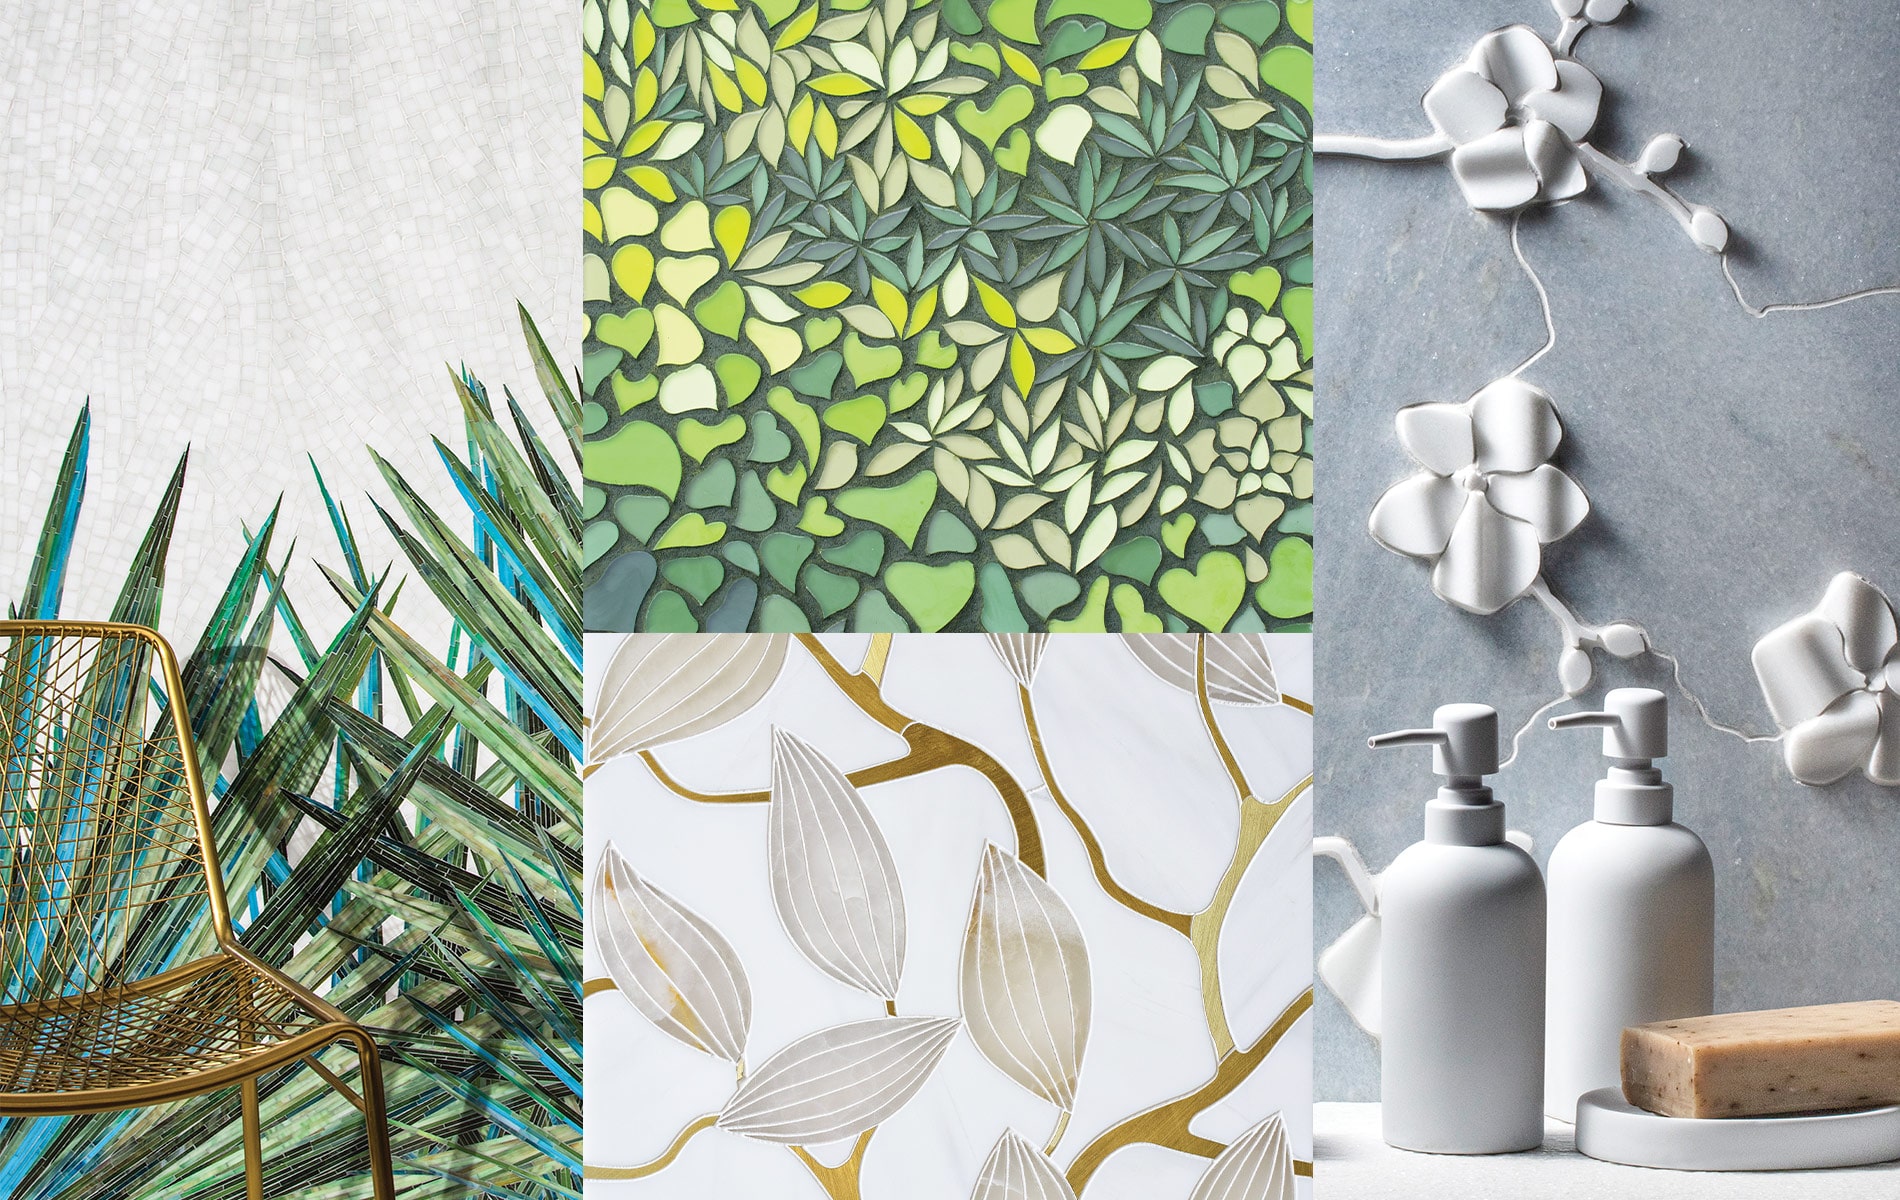 A combination of four images showcasing 4 different tiles offered at Q-Tile. The tiles all reflect nature with green hues or flower designs.